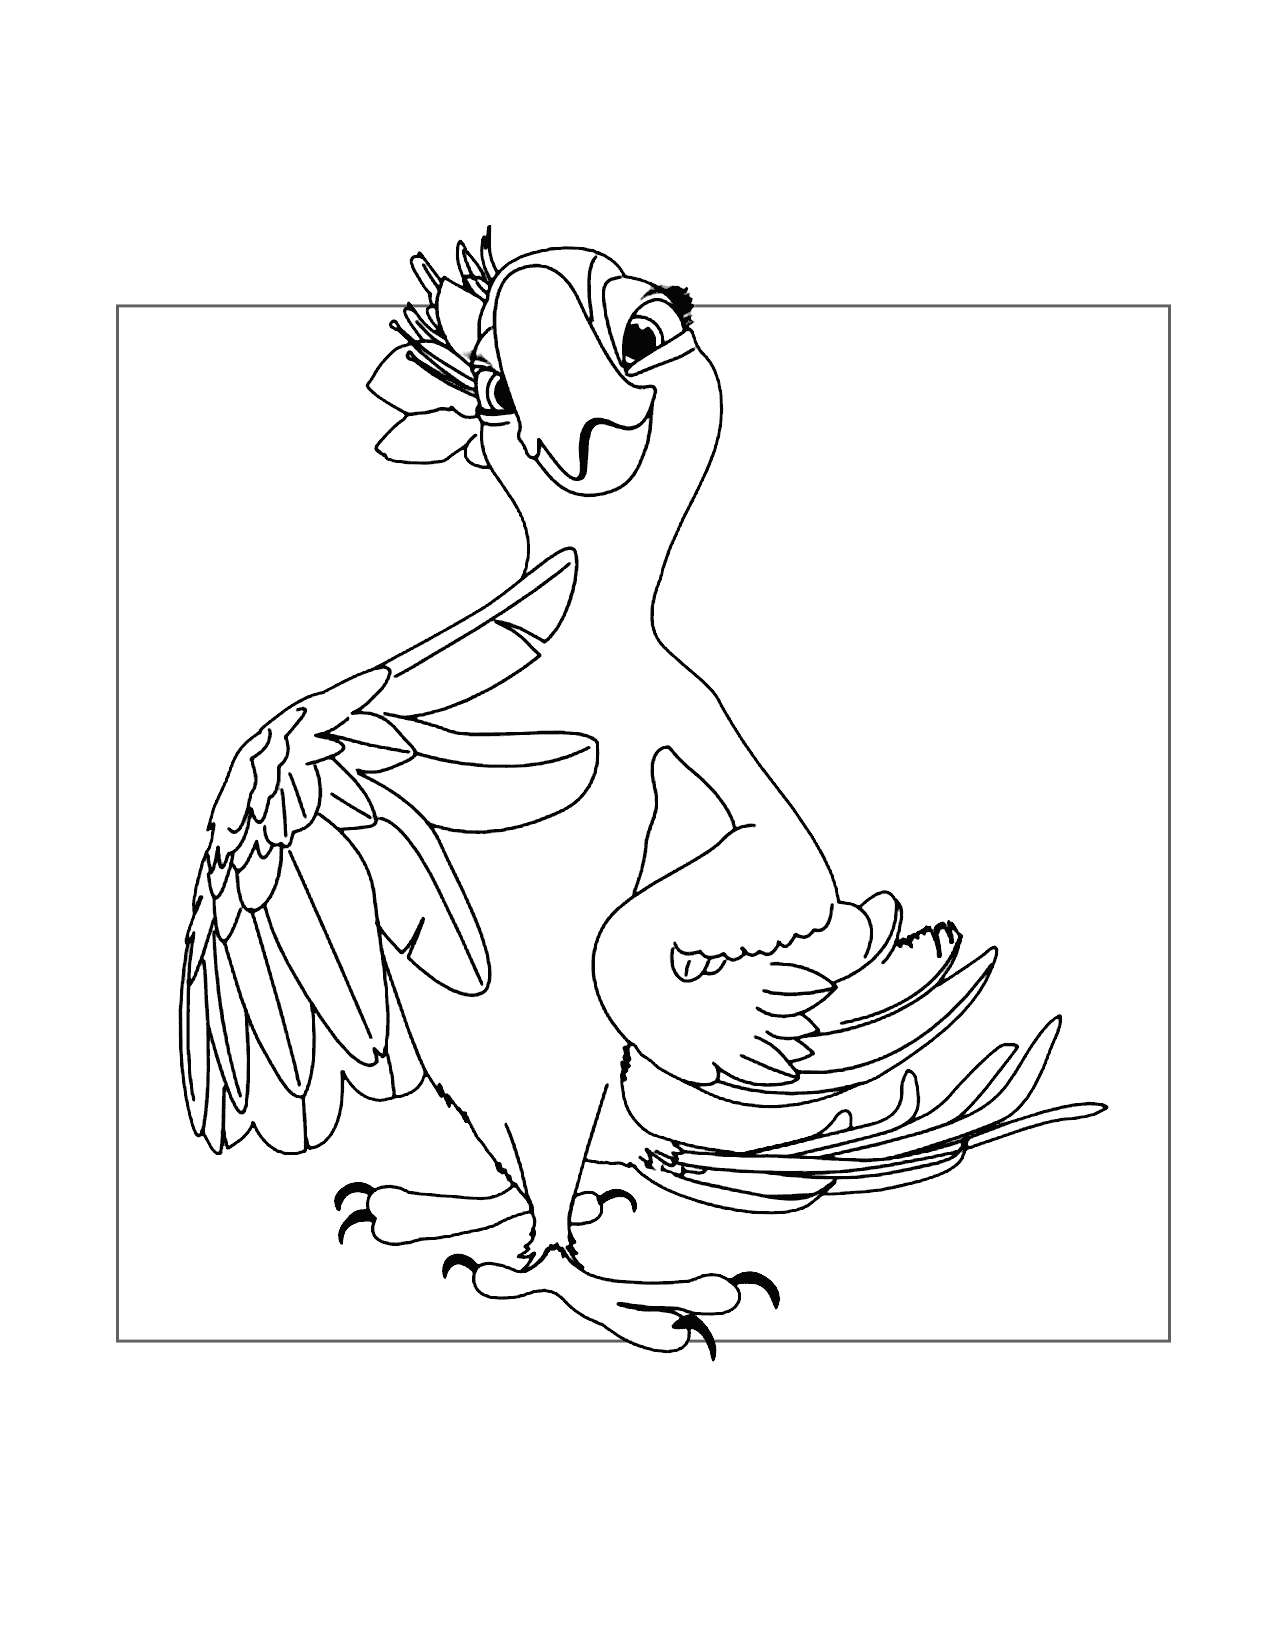 Jewel Rio Coloring Pages